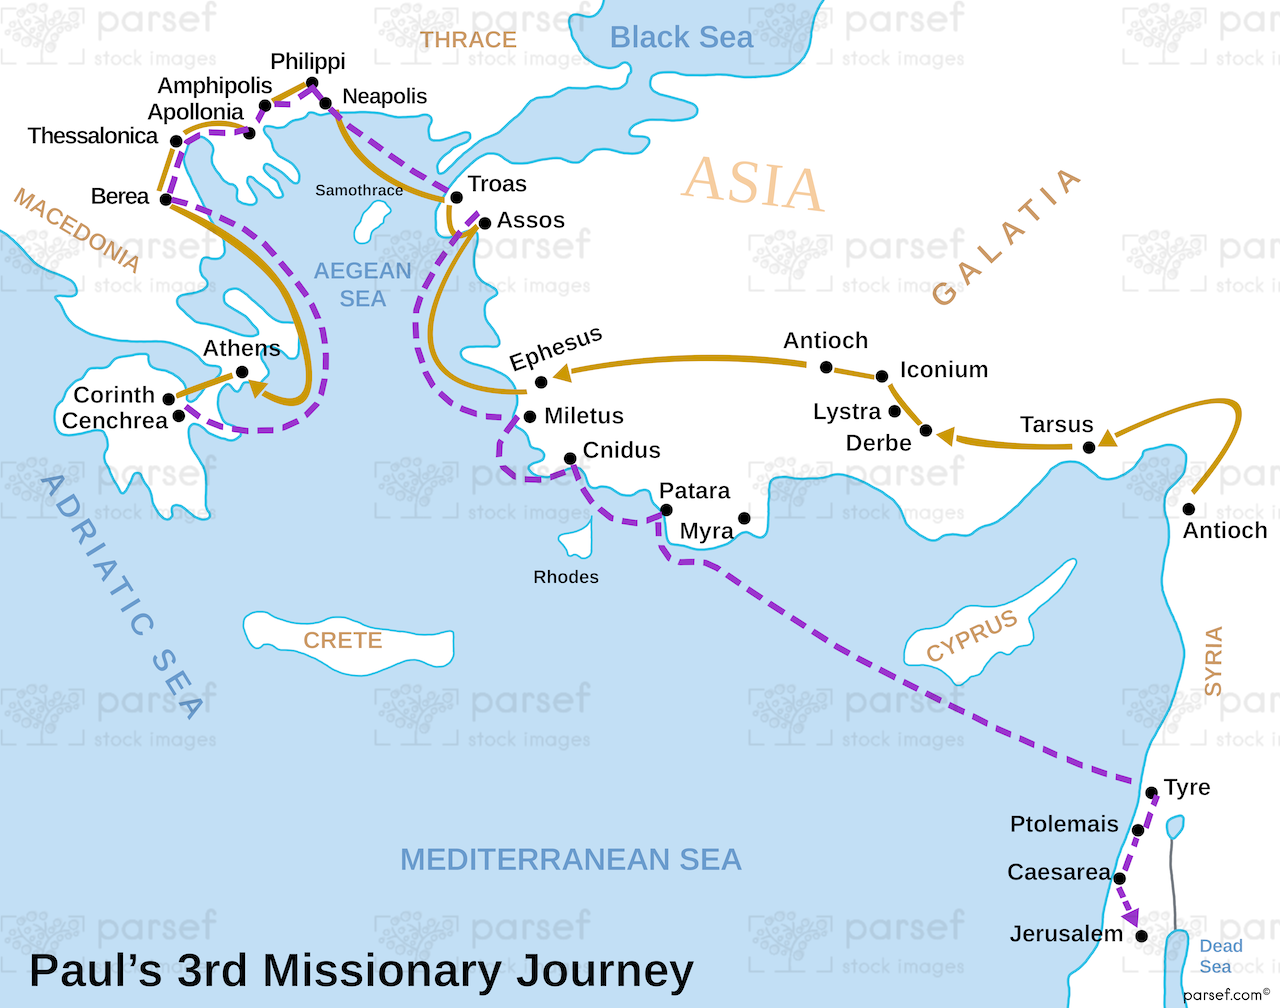 Paul’s 3rd Missionary Journey Map image